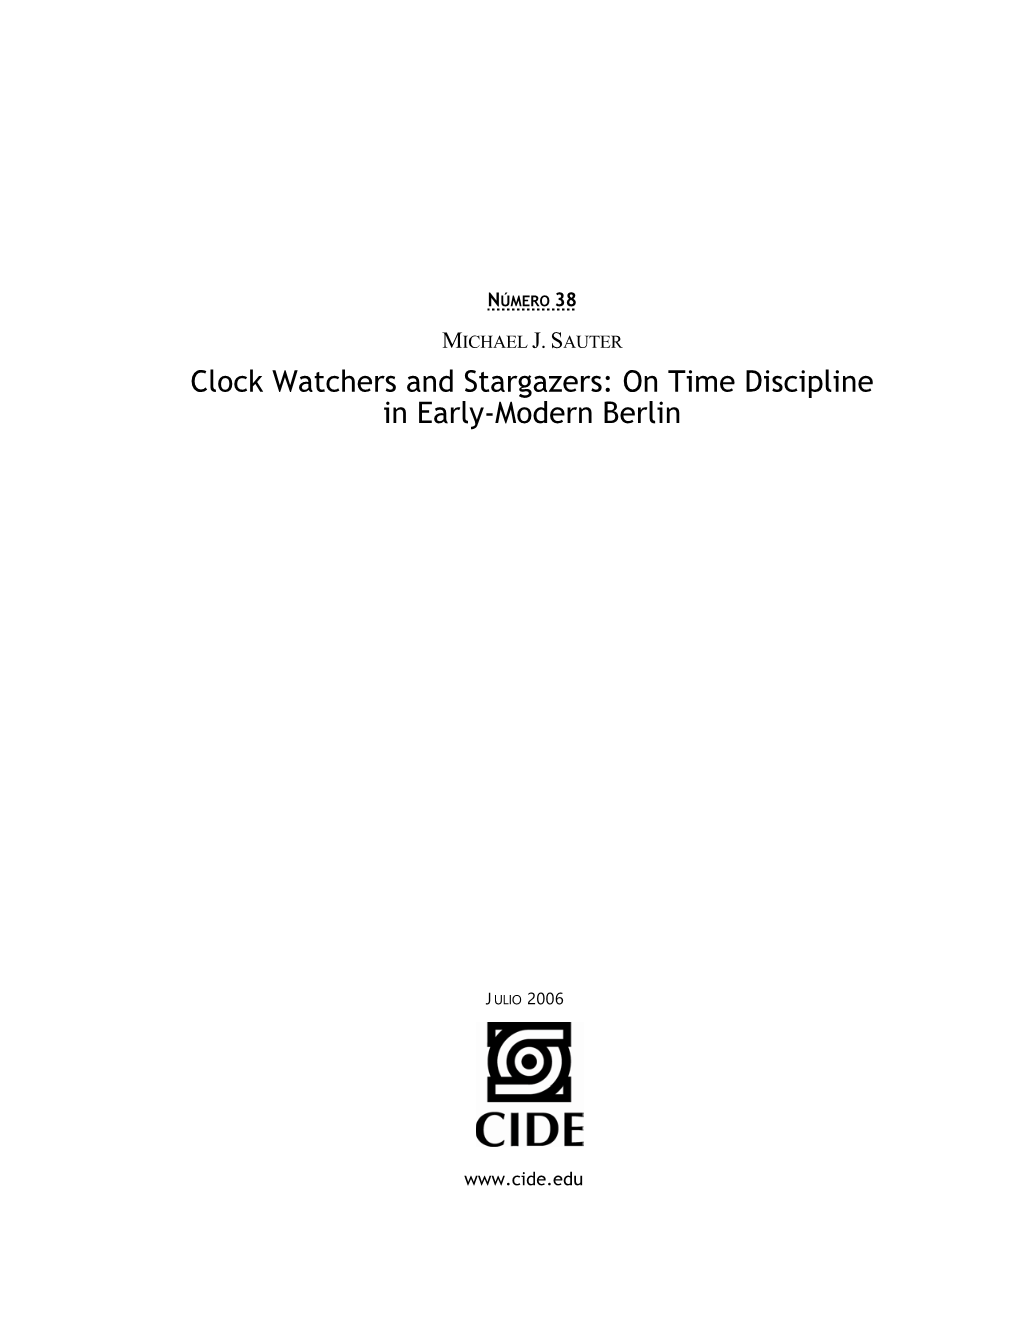 Clock Watchers and Stargazers: on Time Discipline in Early-Modern Berlin